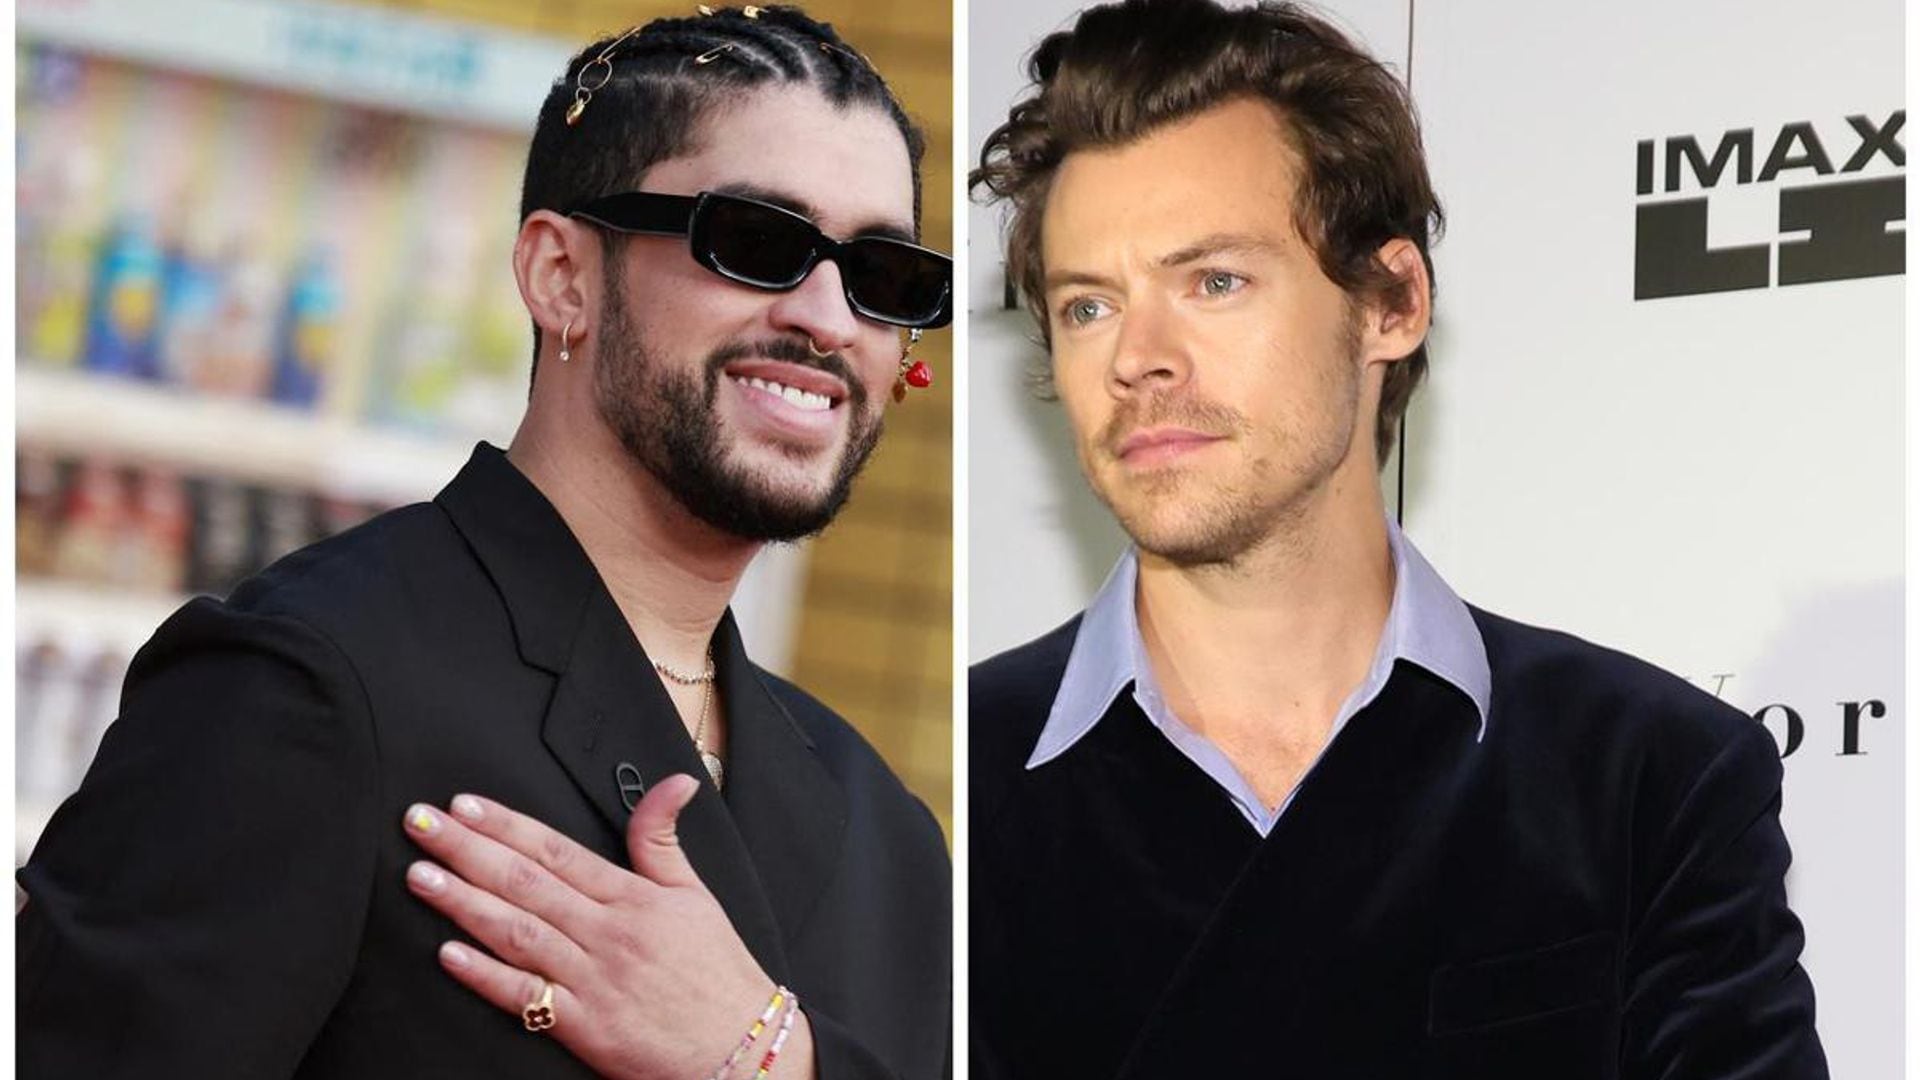 People’s Choice Awards: Bad Bunny and Harry Styles are the top nominees